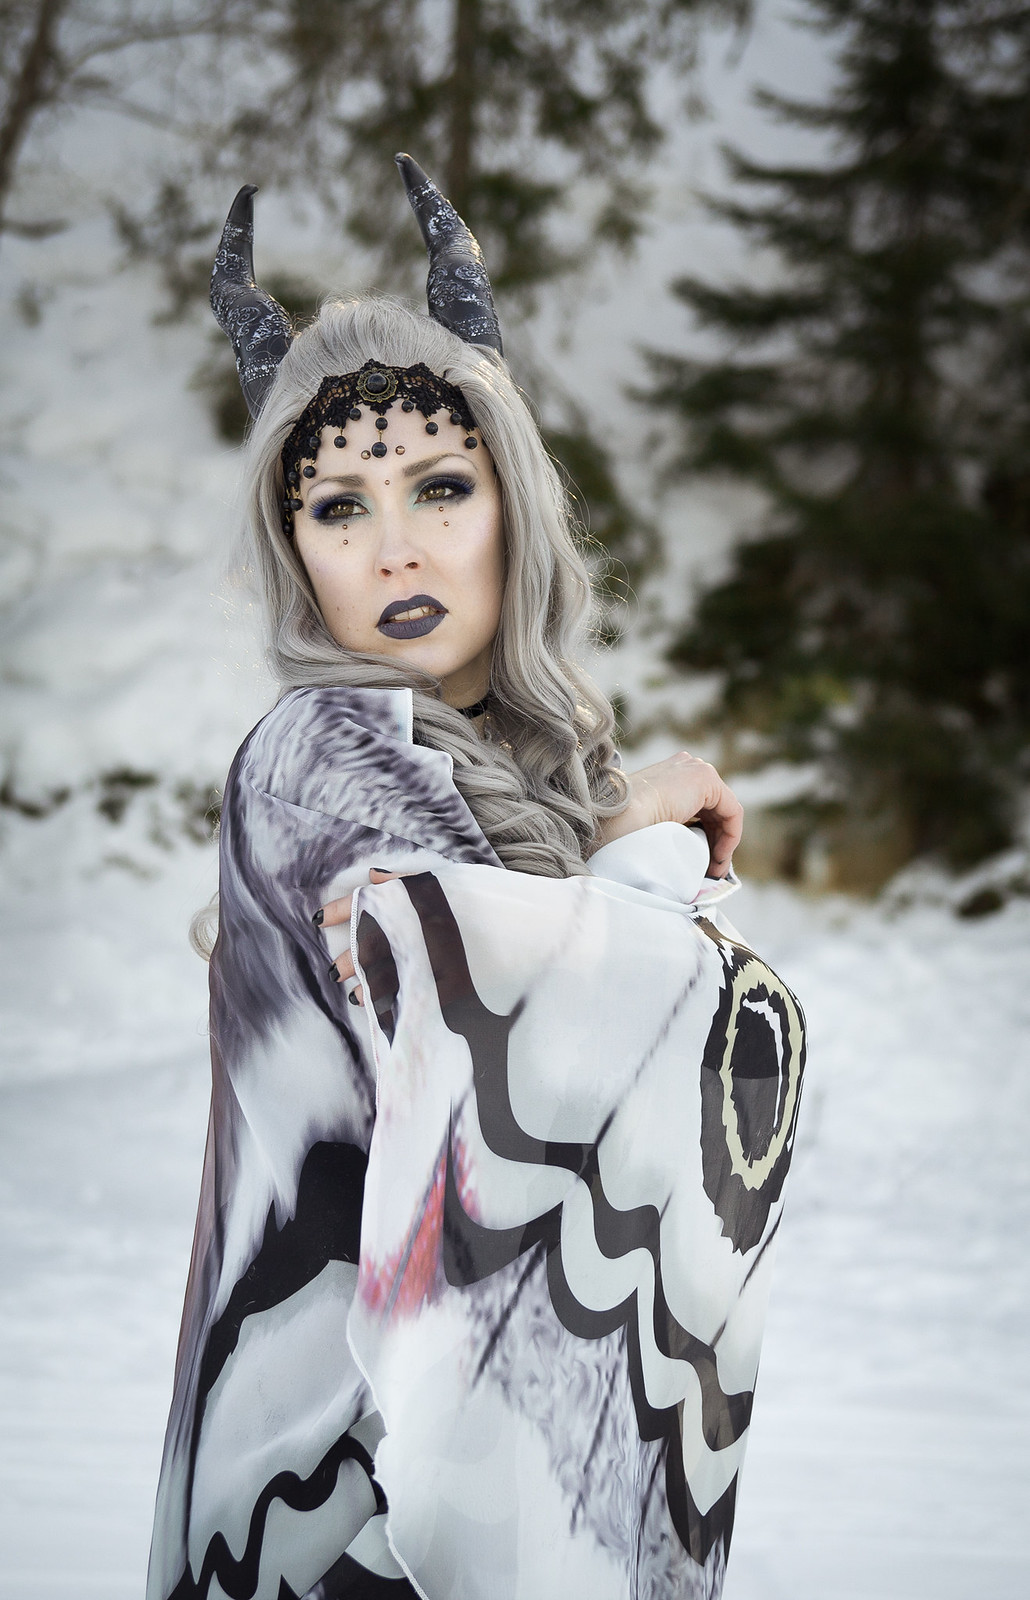 Fairytales and winter fantasy / Photographers and models meet-up